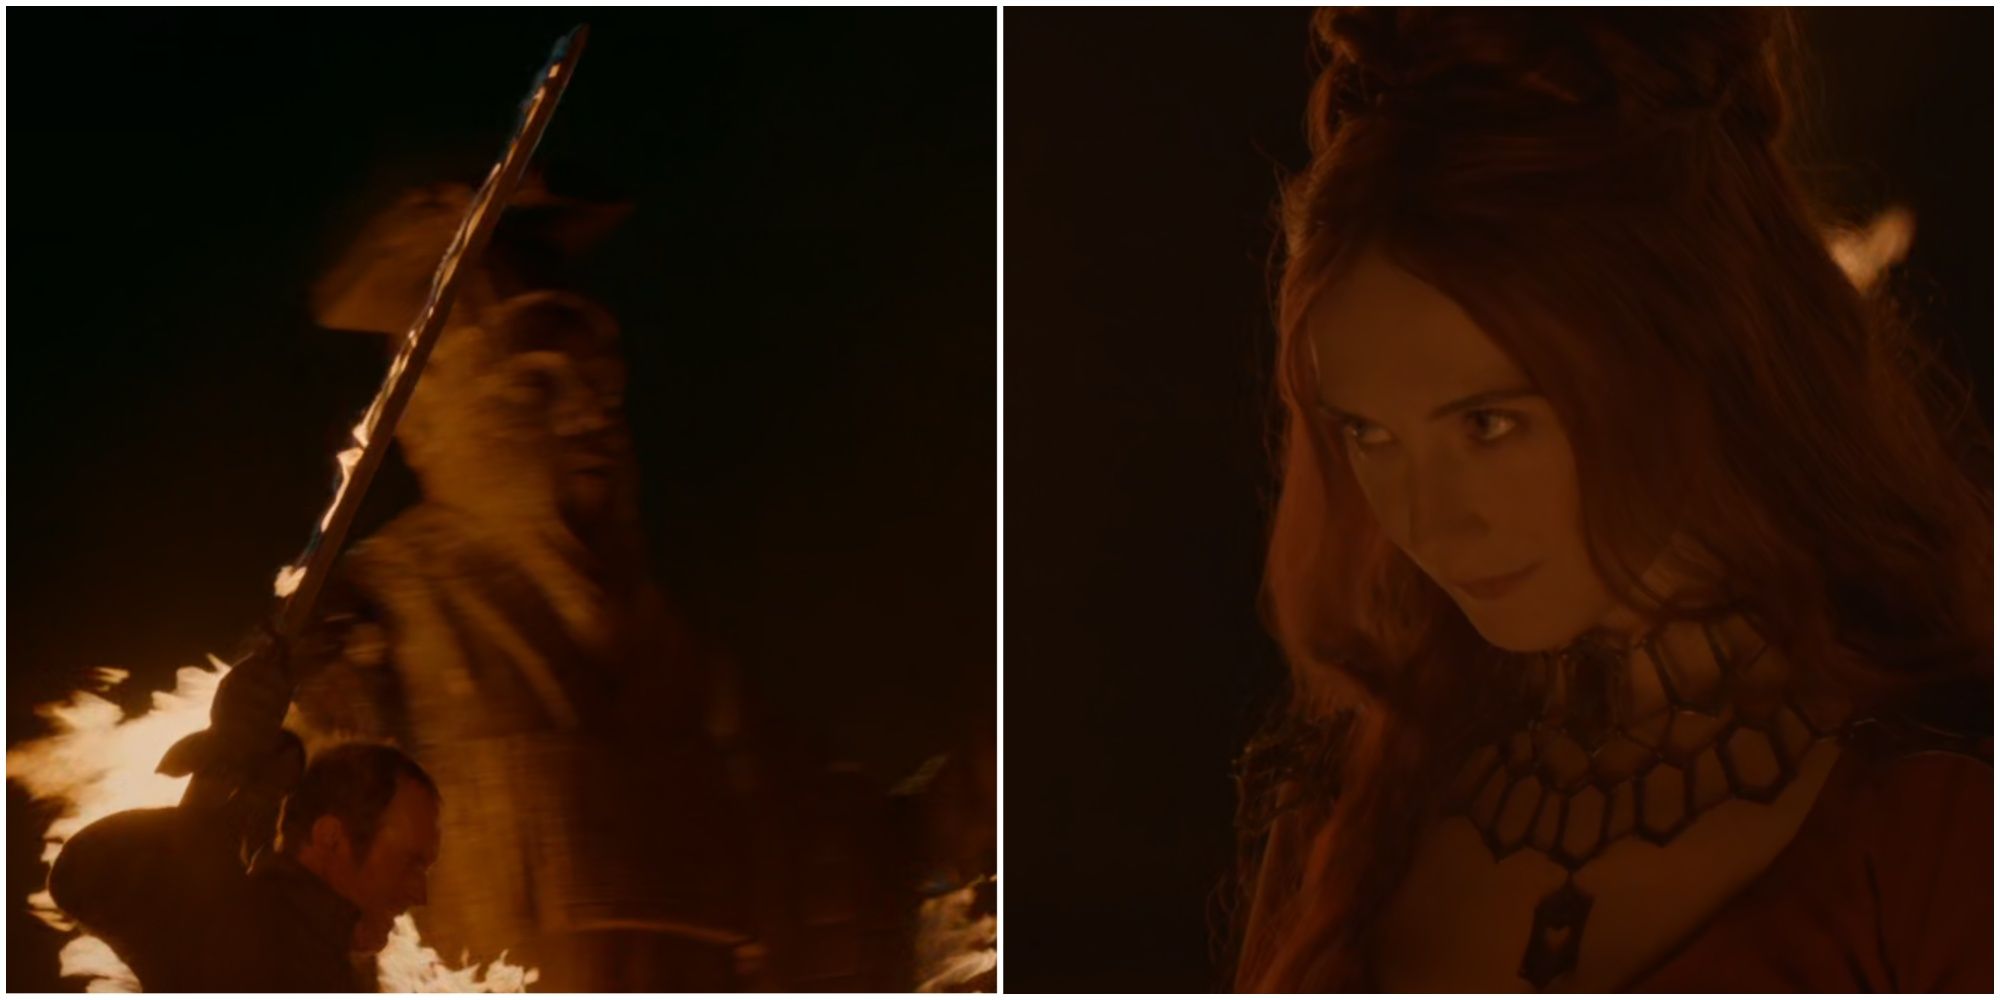 Split image of Stannis' sword and Lady Melisandre in Game of Thrones.